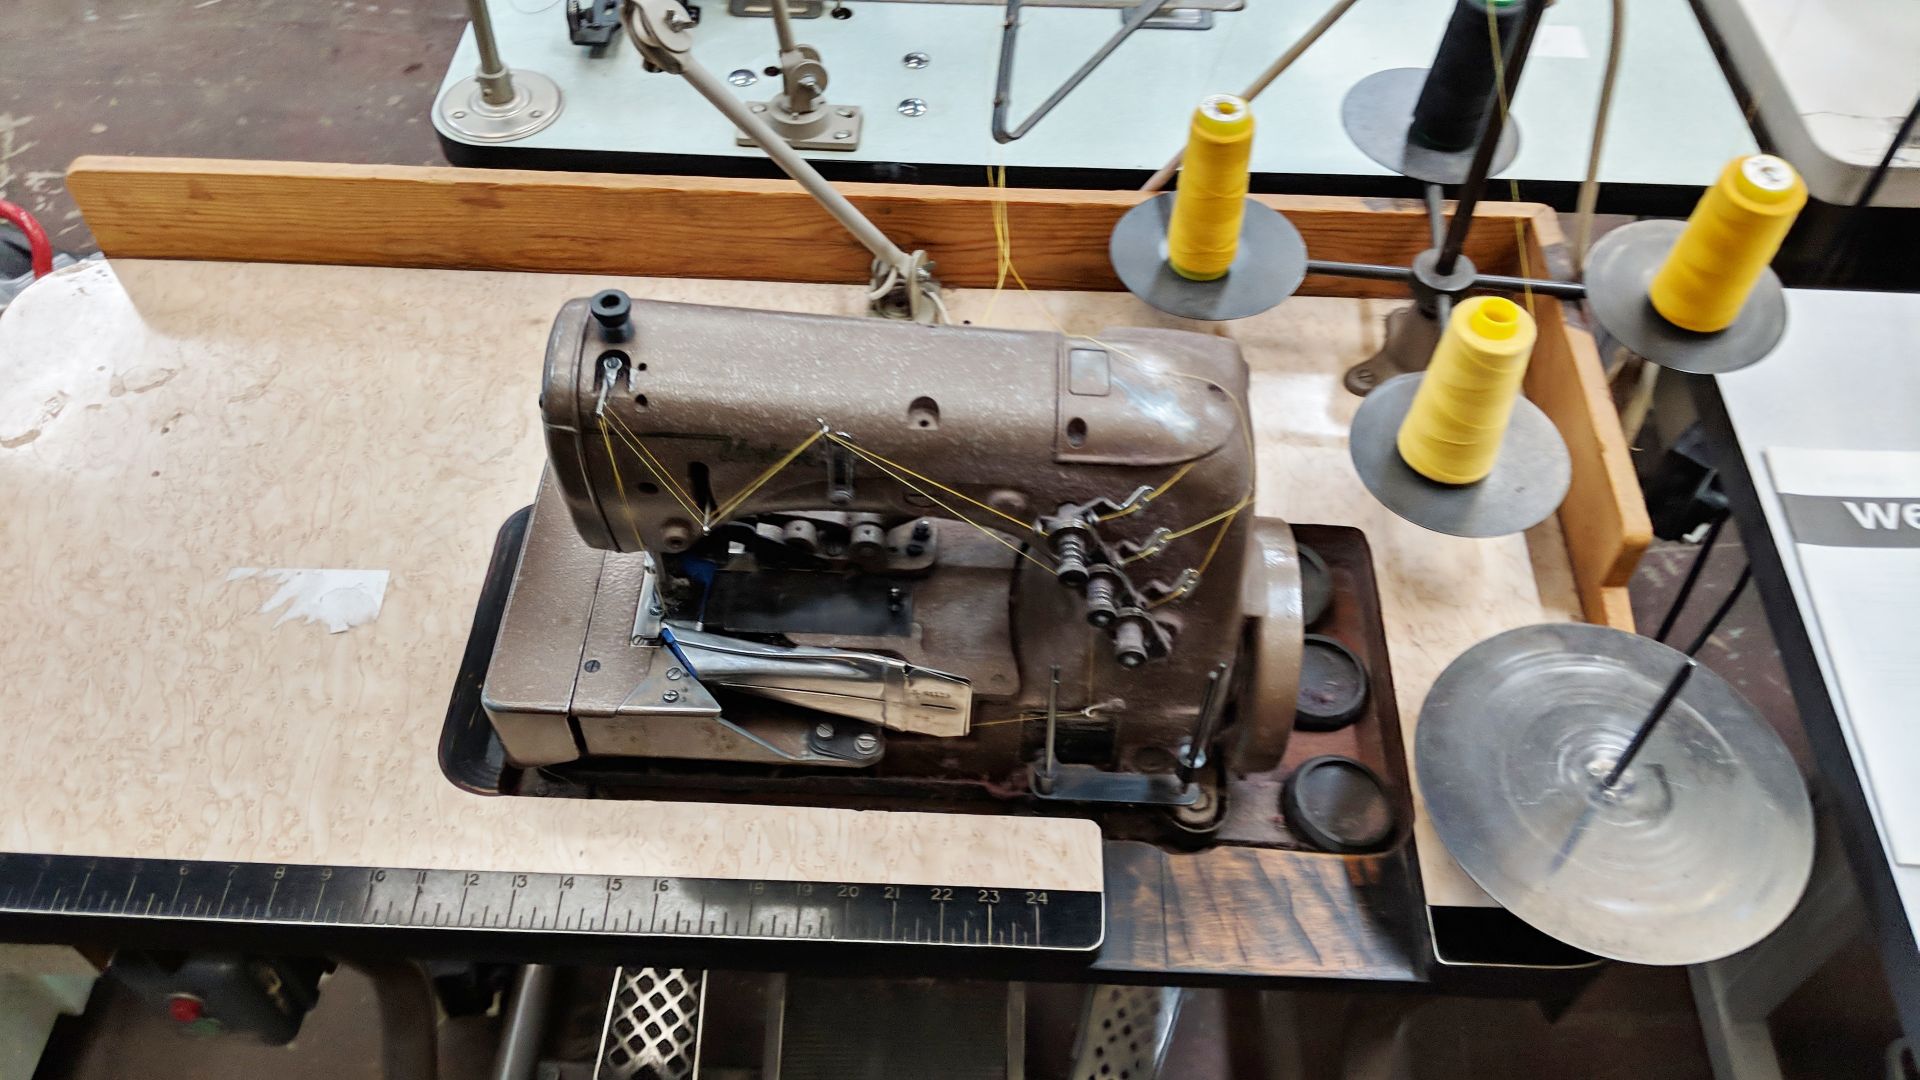 Union Special overlocker sewing machine on bench with tape feed attachments, including foot & hand - Image 5 of 8